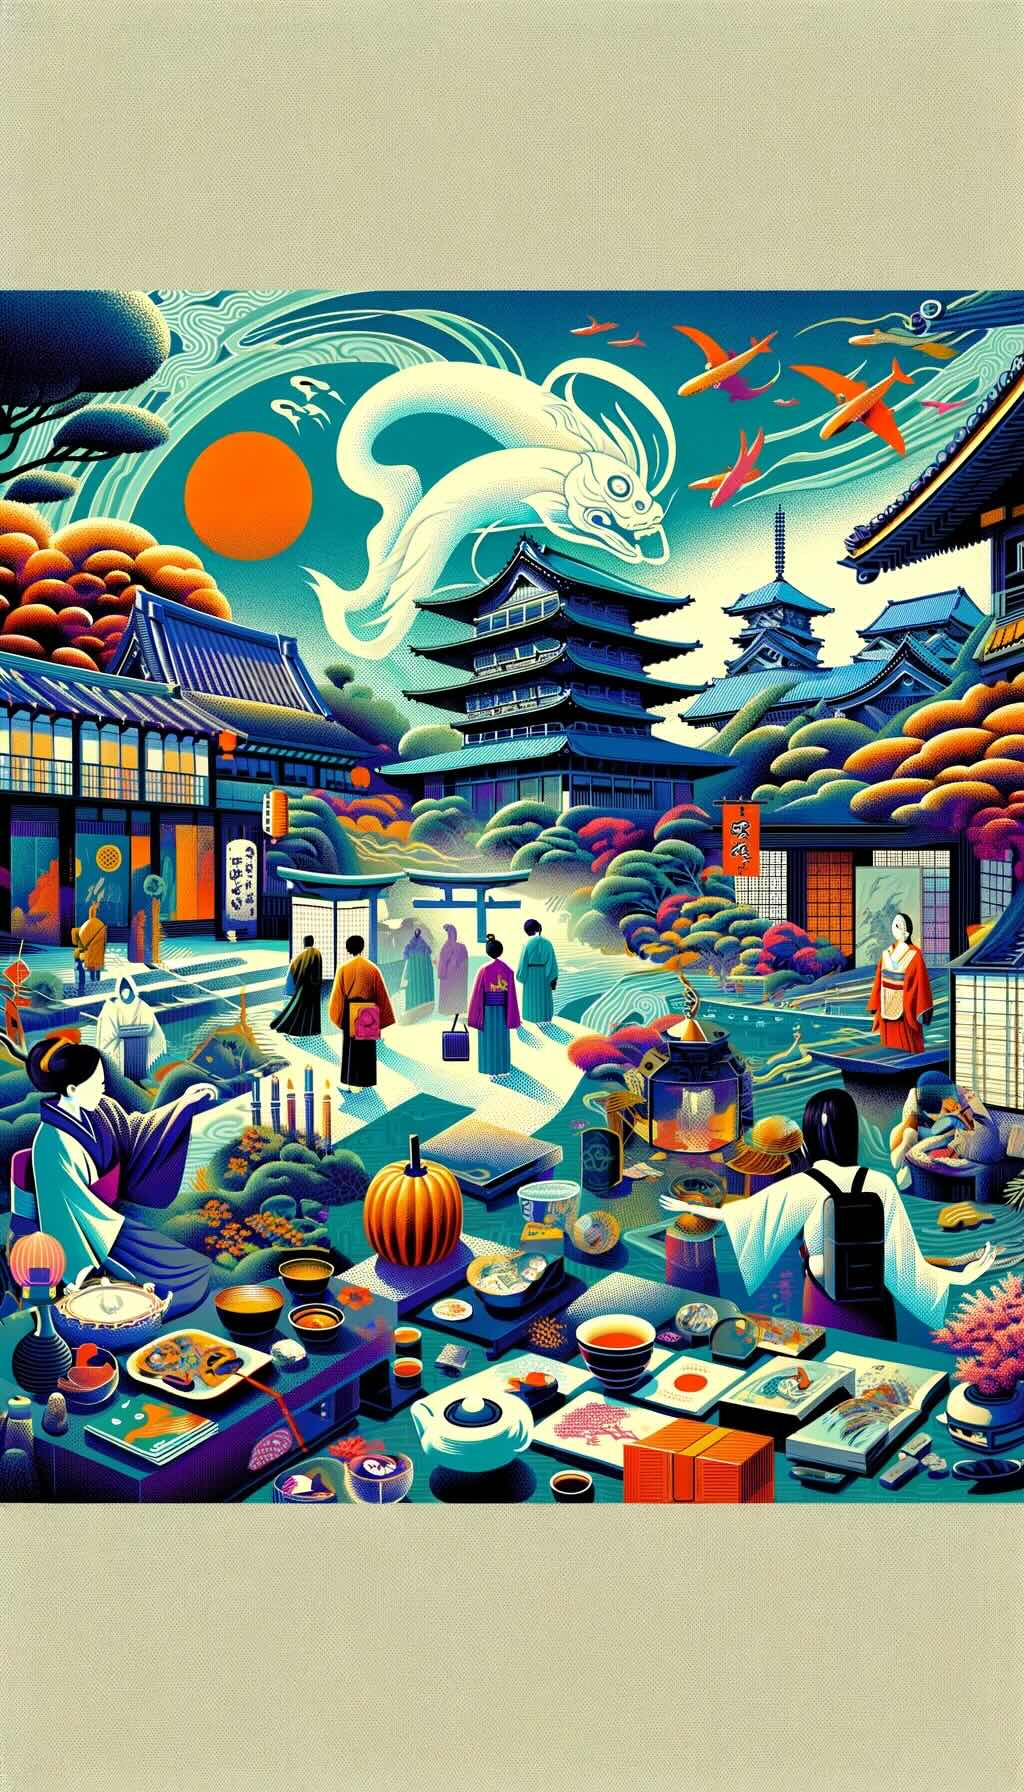 Concept of combining visits to Japan’s haunted sites with other cultural activities. It shows a traveler engaging in diverse experiences like exploring historical landmarks, local museums, and participating in traditional Japanese activities such as tea ceremonies and calligraphy workshops. The composition, vibrant and rich in cultural context, effectively merges the eerie aspects of haunted site visits with the serene and vibrant elements of Japanese culture.